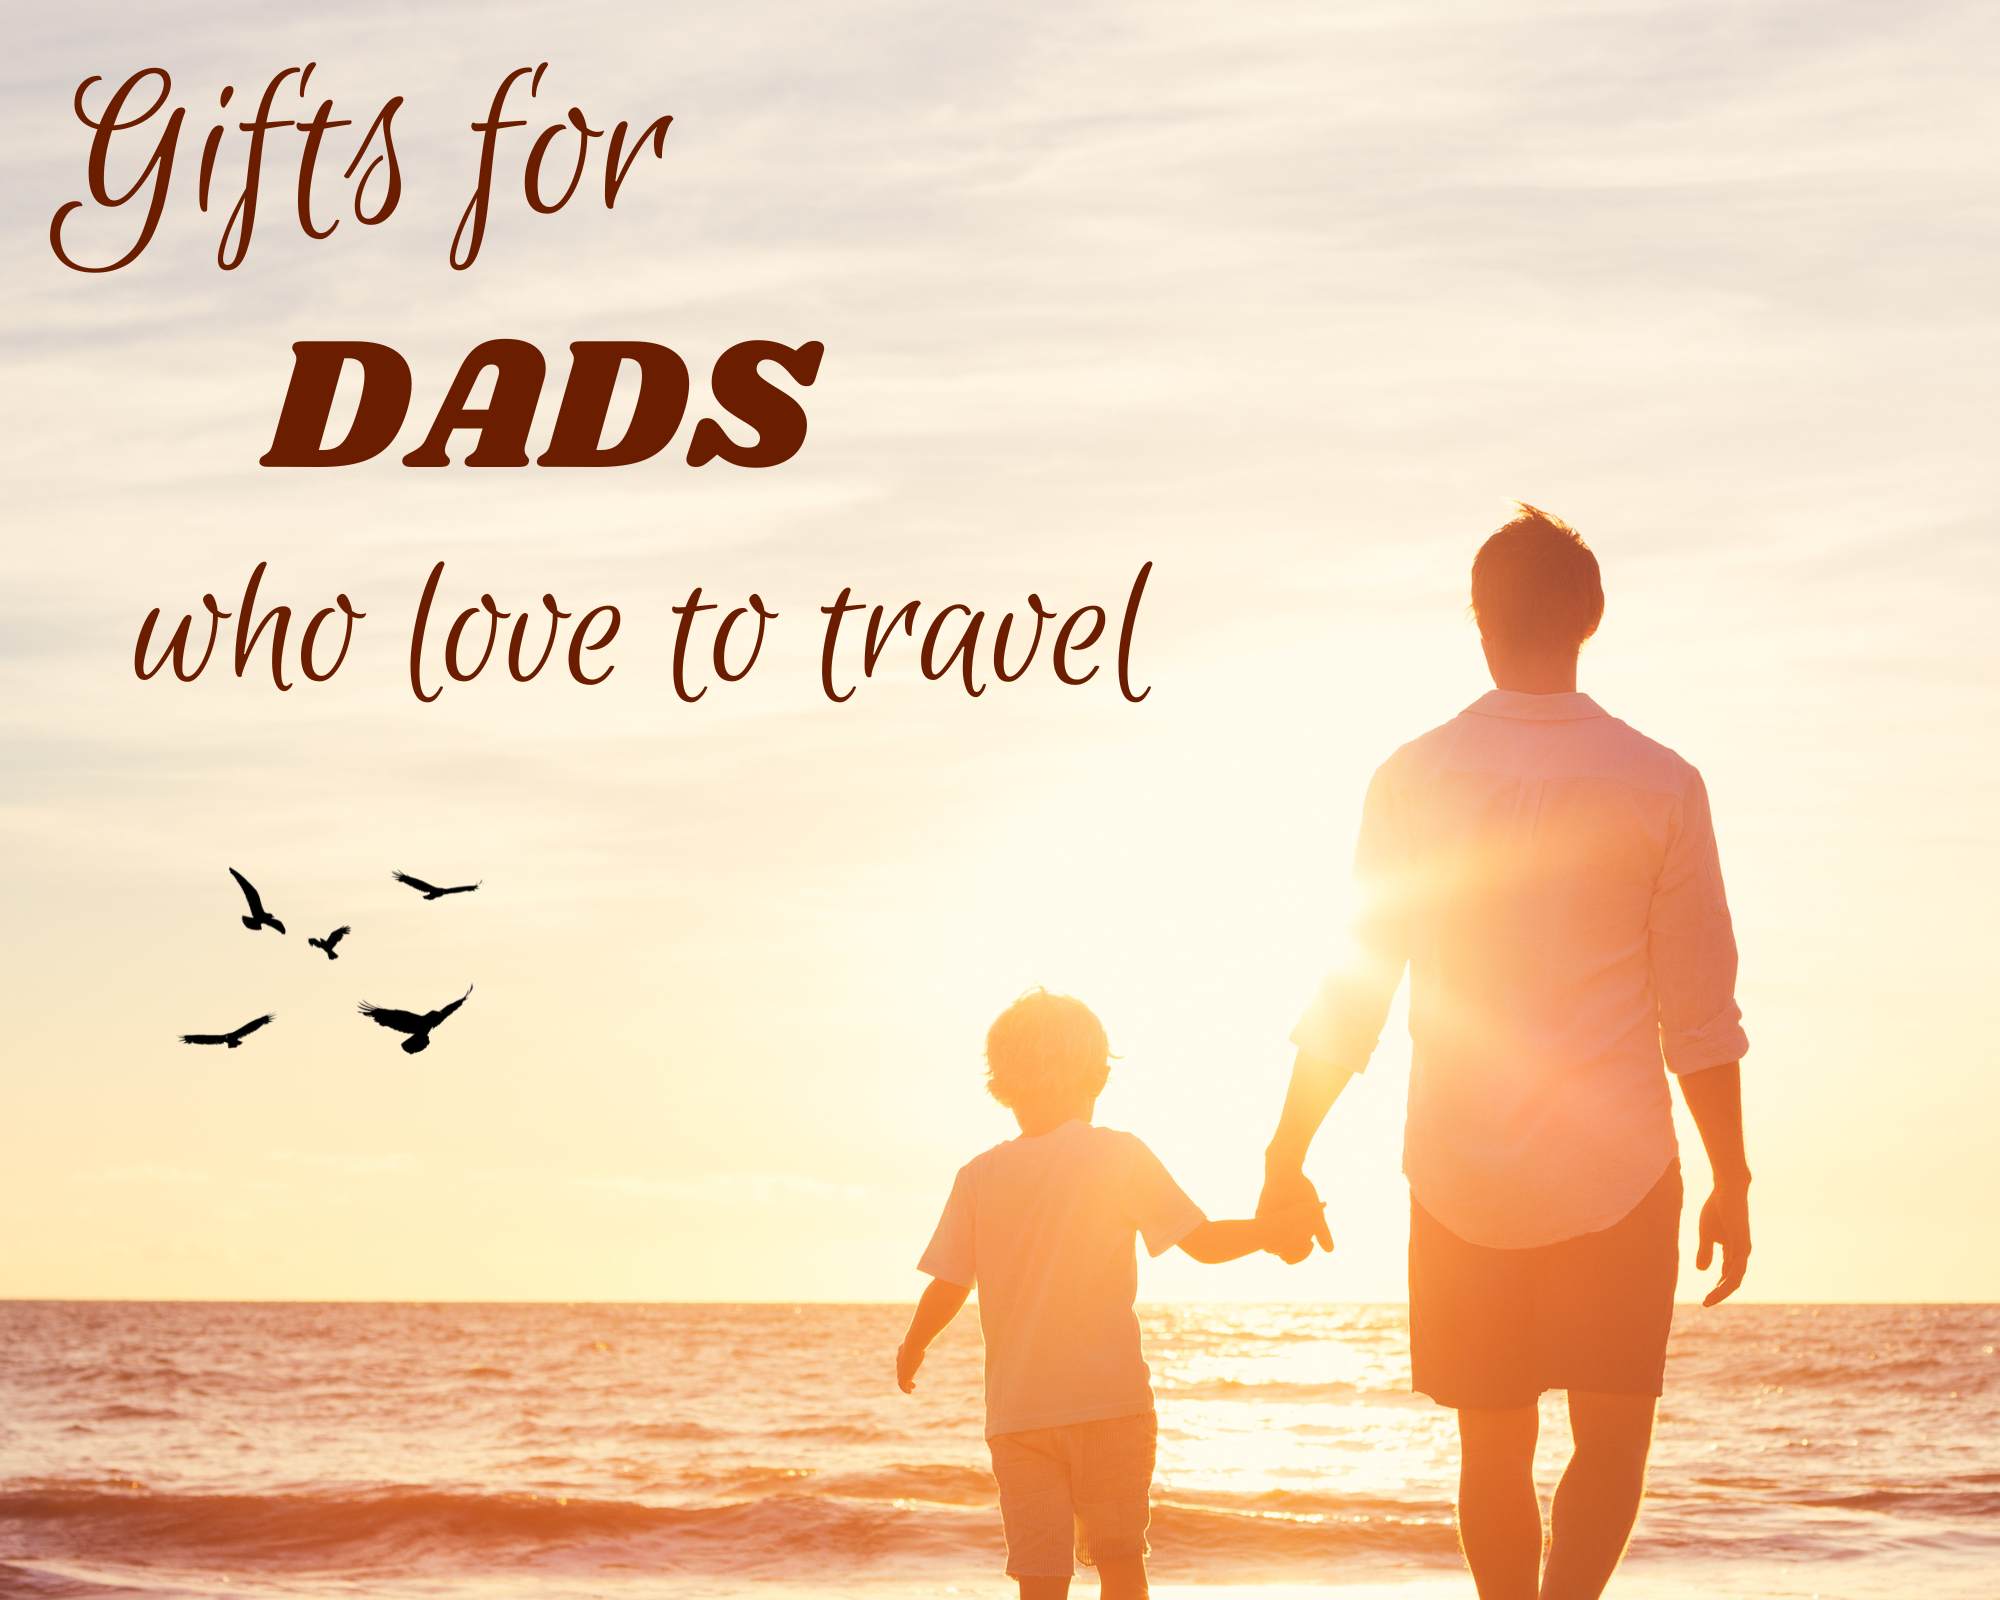 A blog post featuring gift ideas for dads who love to travel. Photo of a father and son walking on a beach at sunset.